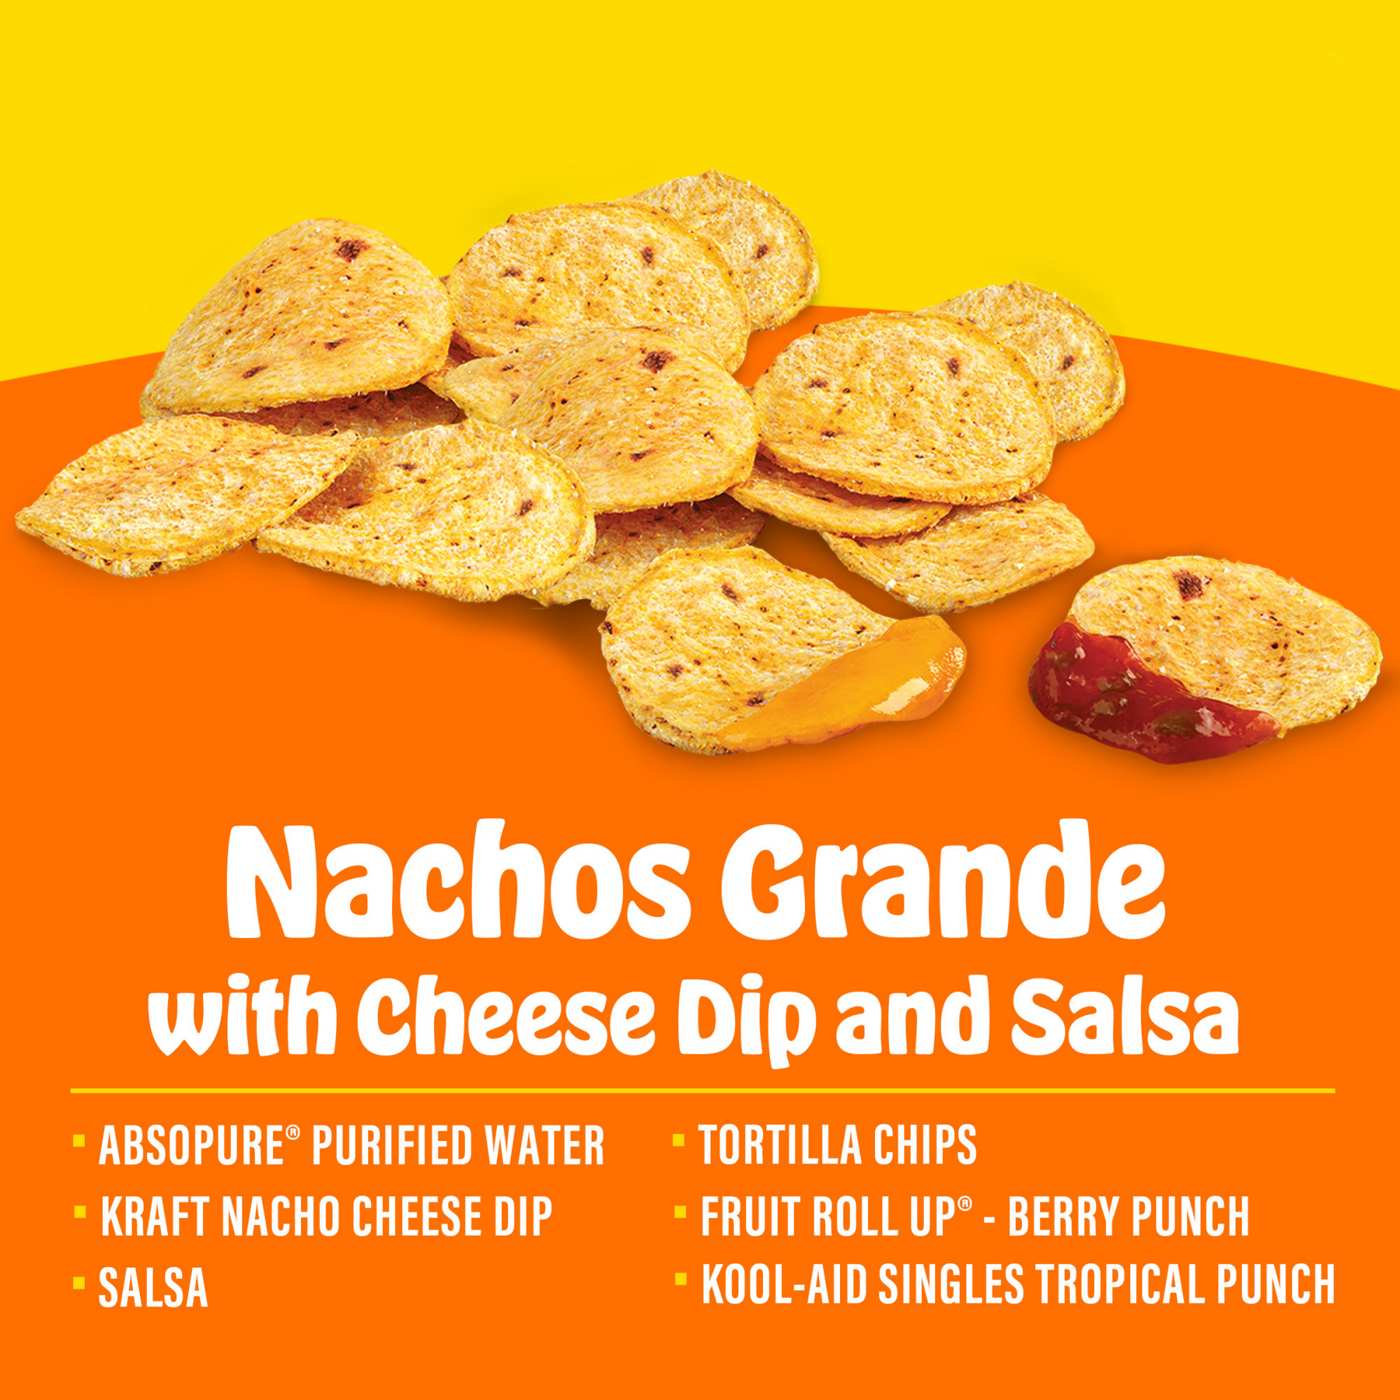 Lunchables Uploaded Meal Kit - Nachos Grande with Cheese Dip & Salsa; image 5 of 5